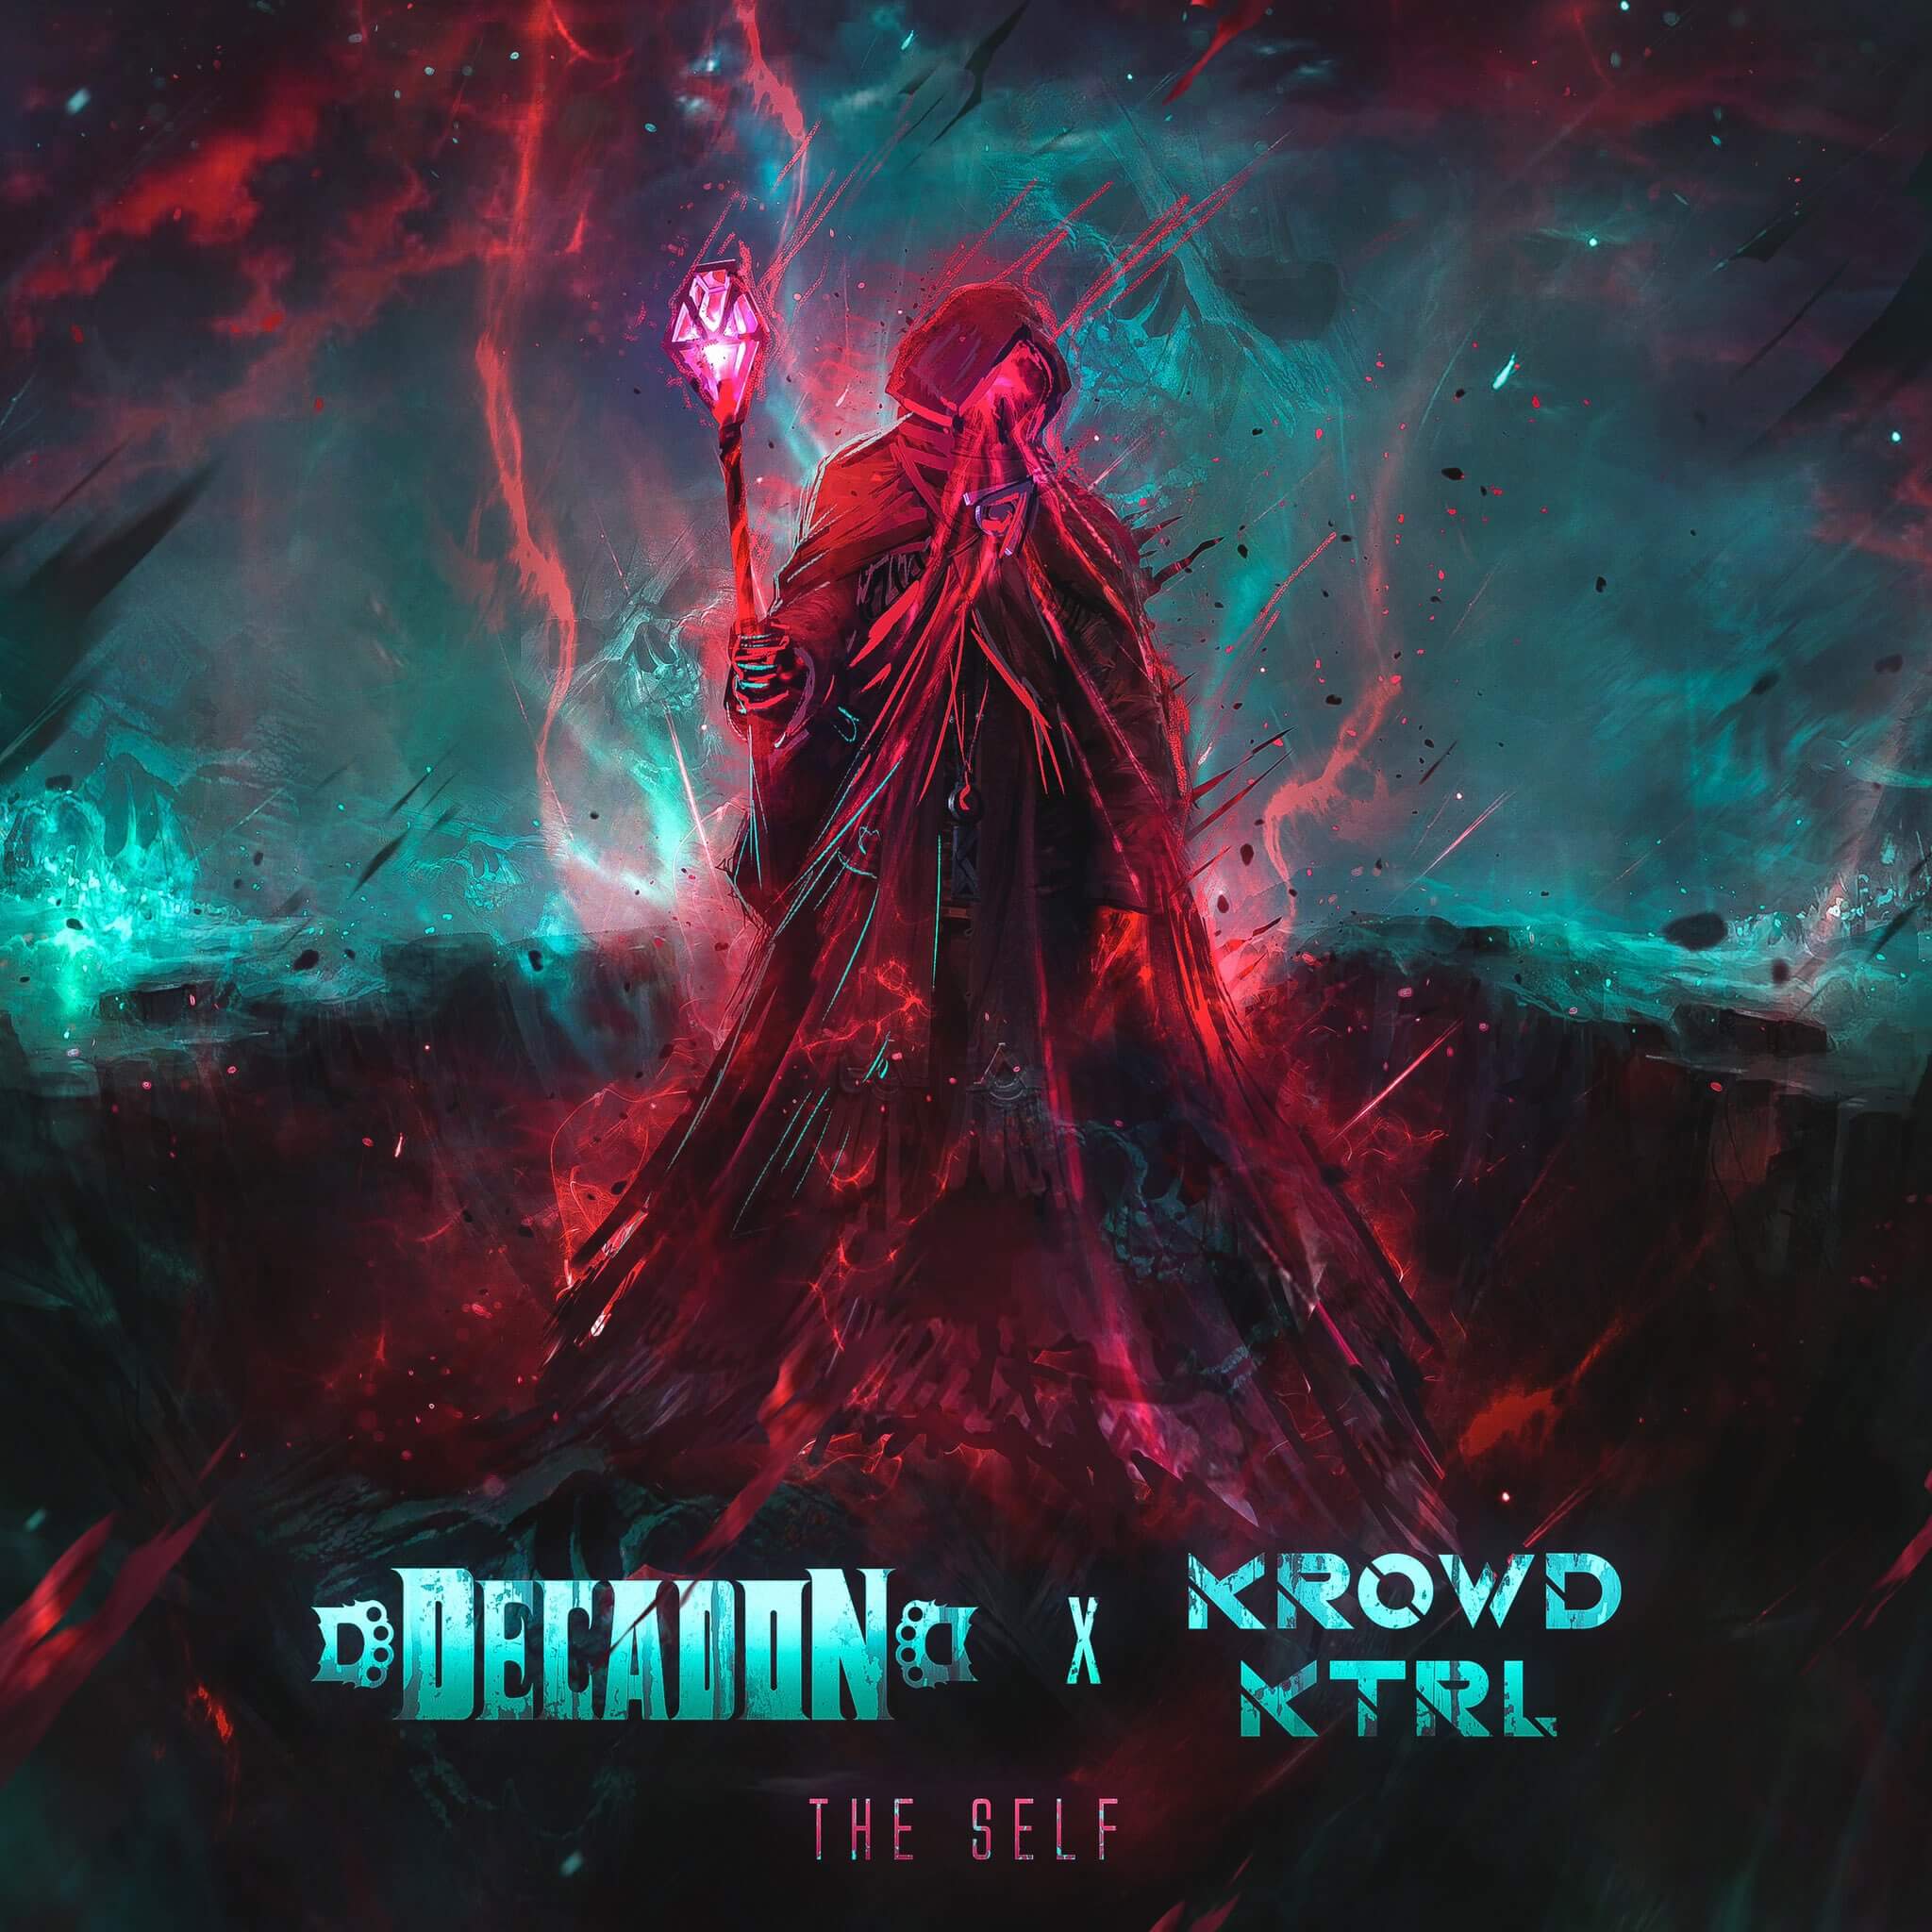 Decadon and KROWD KTRL Join Forces to Create ‘The Self’